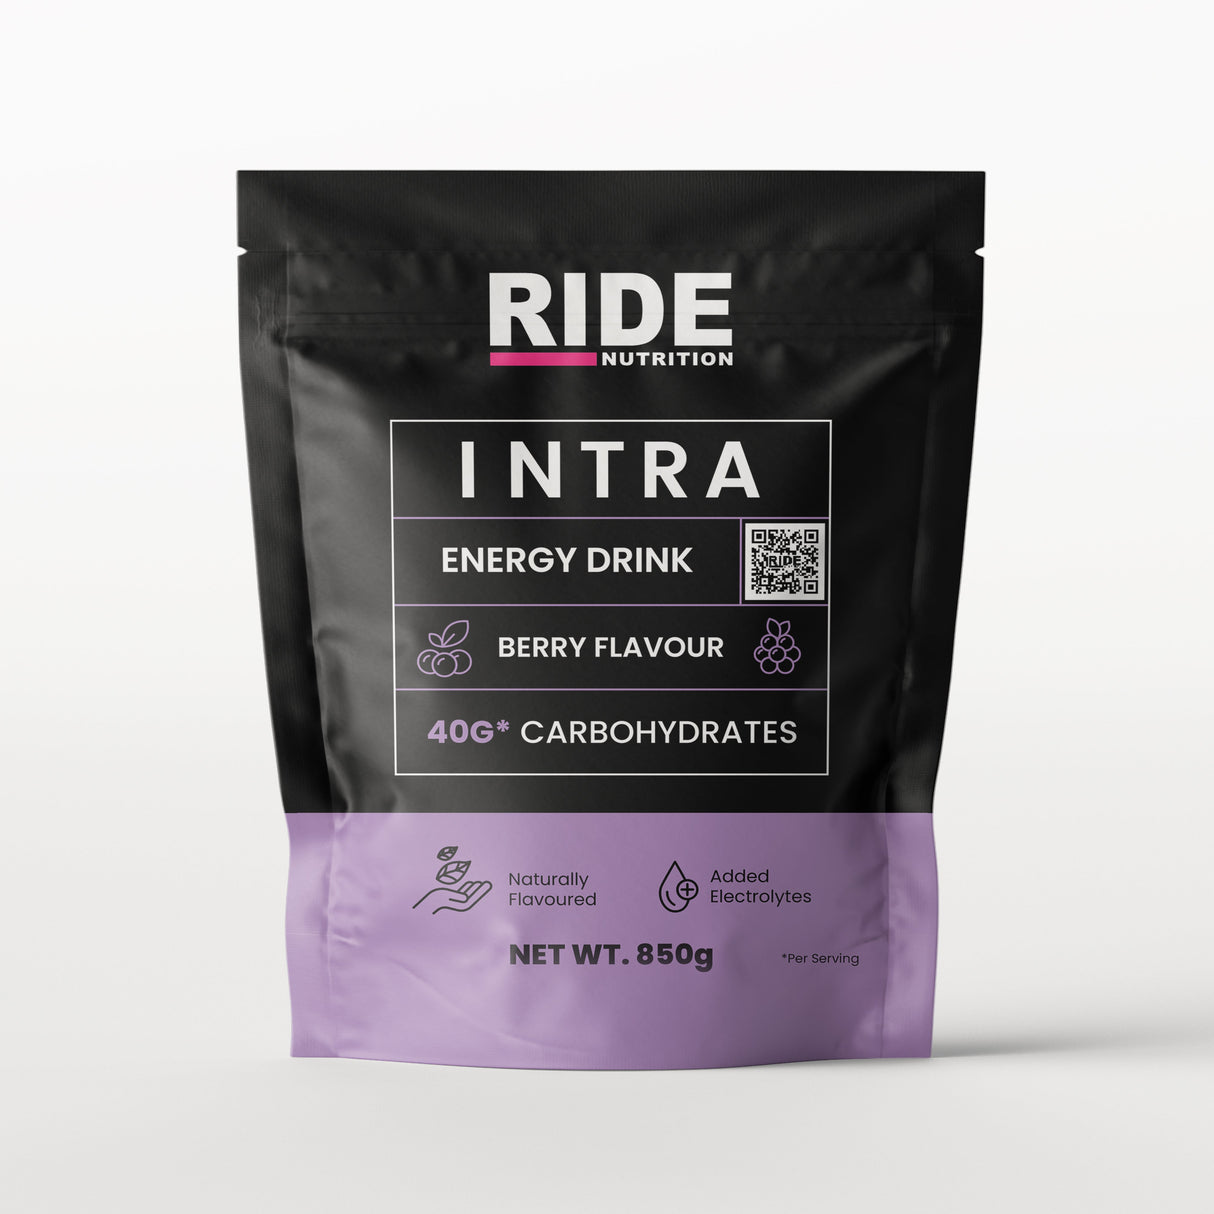 RIDE NUTRITION INTRA ENERGY DRINK - BERRY